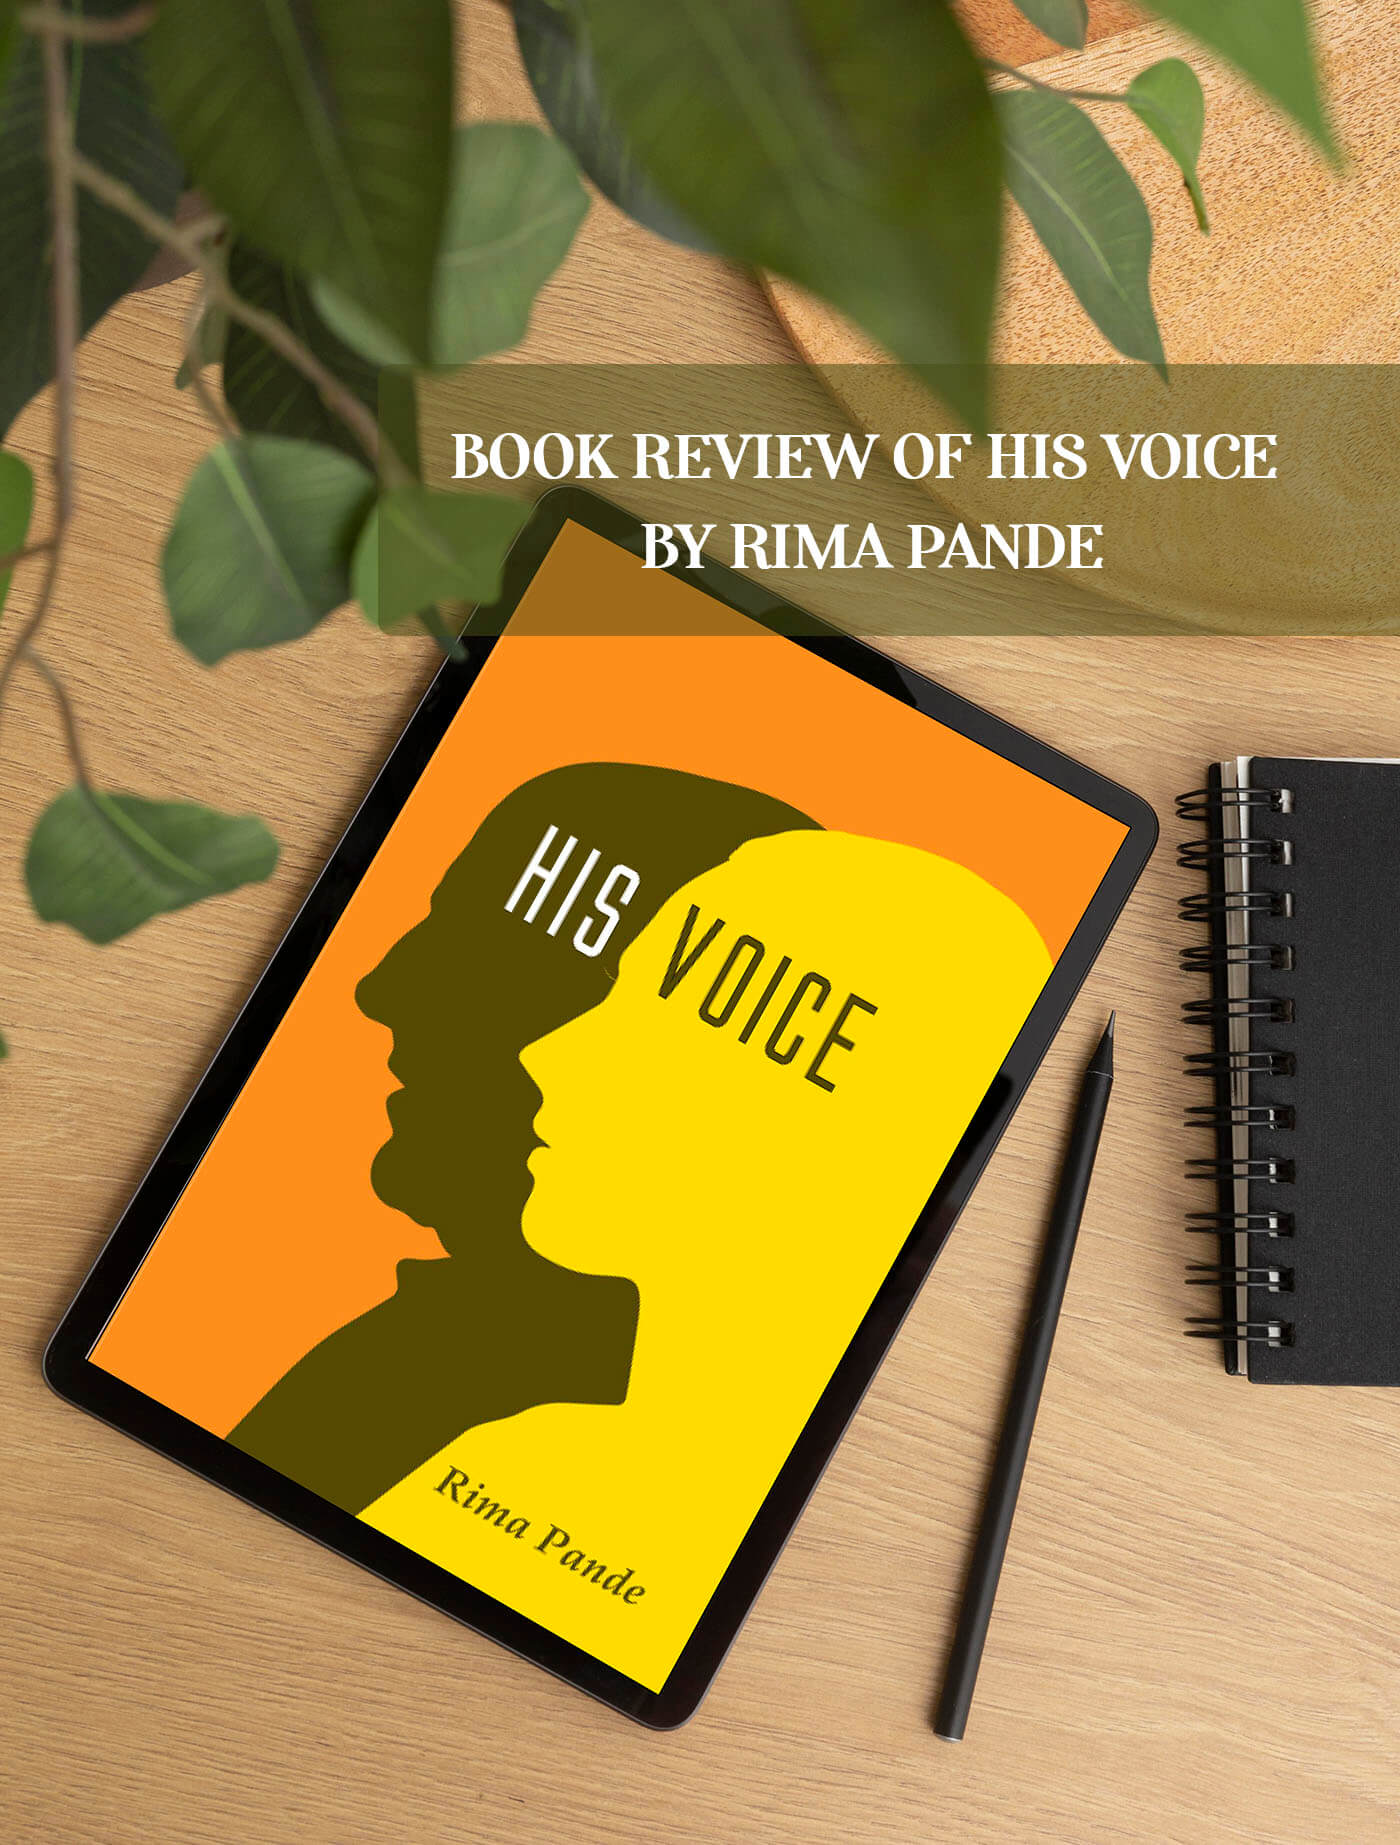 Book Review of His Voice by Rima Pande